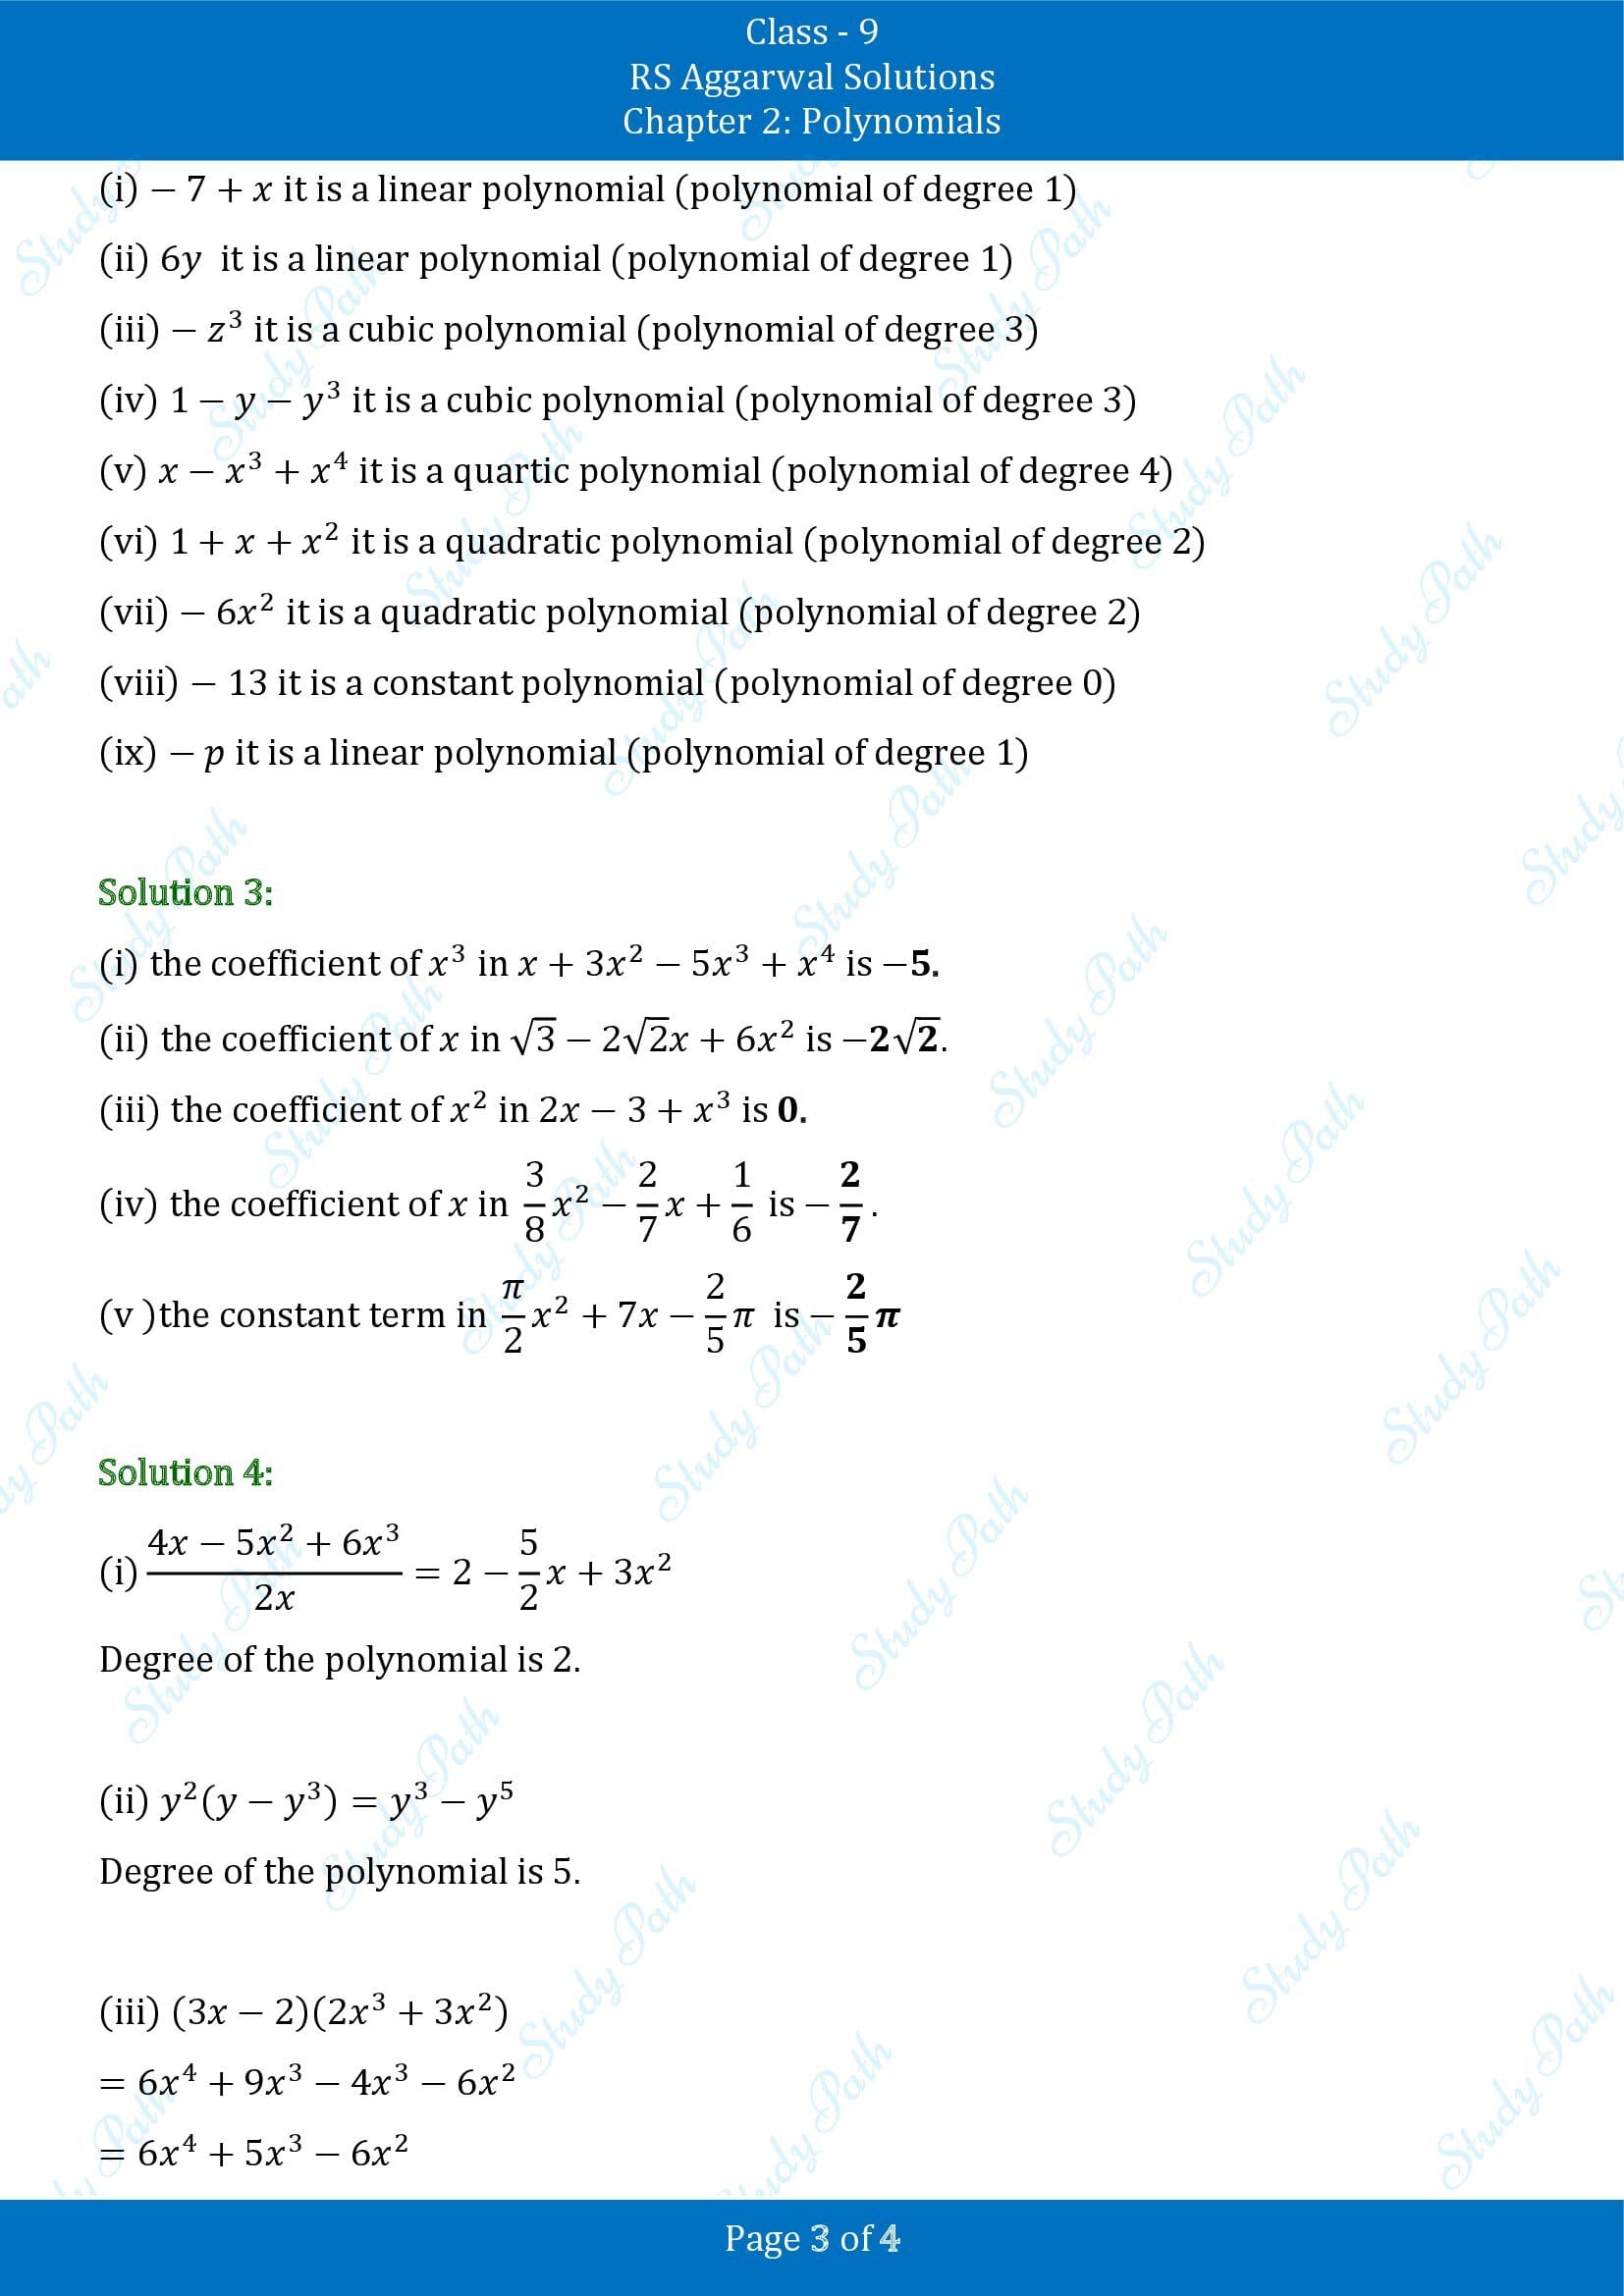 RS Aggarwal Solutions Class 9 Chapter 2 Polynomials Exercise 2A 00003